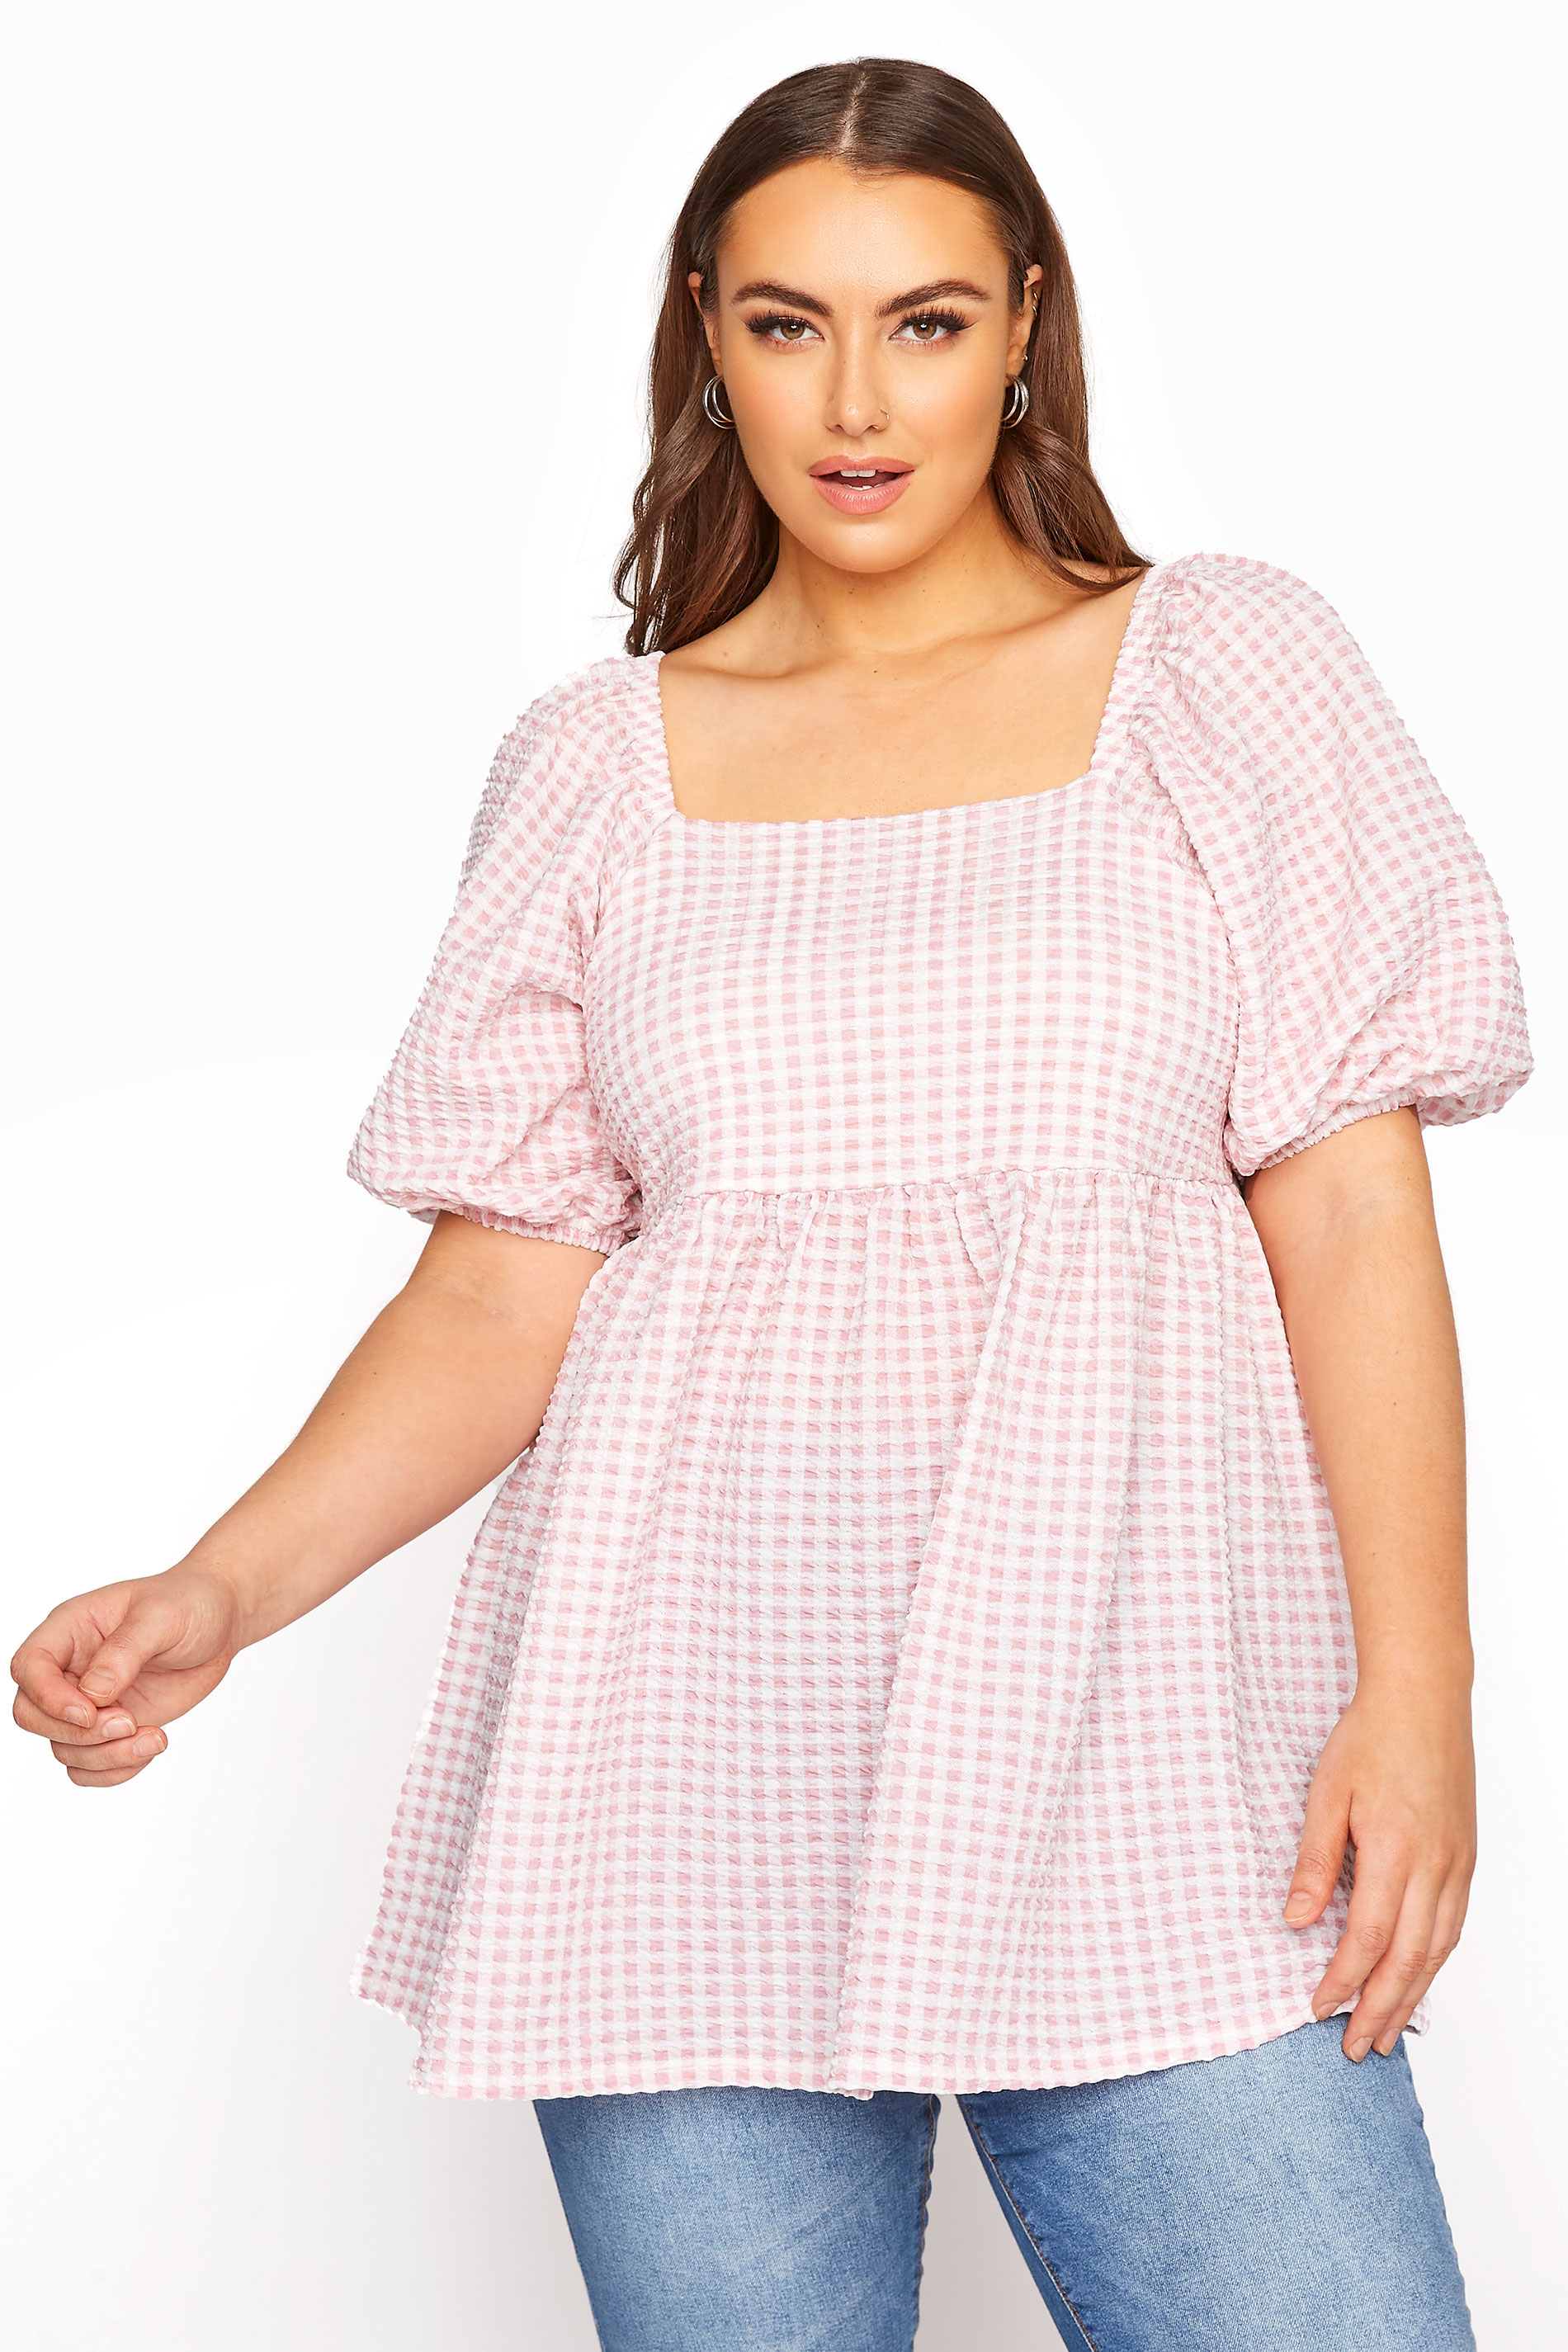 LIMITED COLLECTION Pink Gingham Milkmaid Top